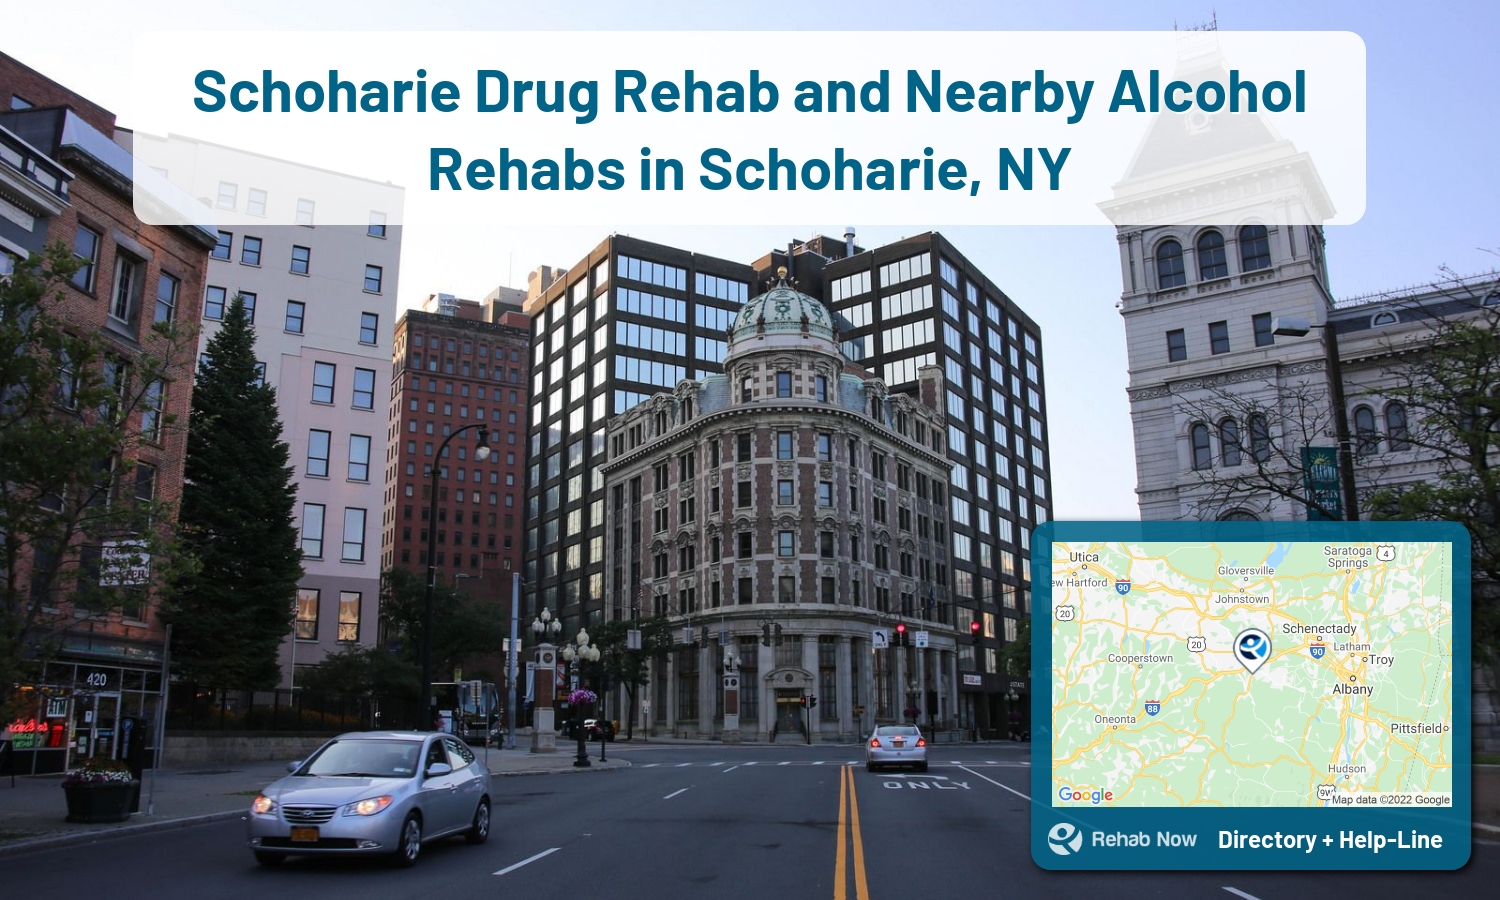 Find drug rehab and alcohol treatment services in Schoharie. Our experts help you find a center in Schoharie, New York